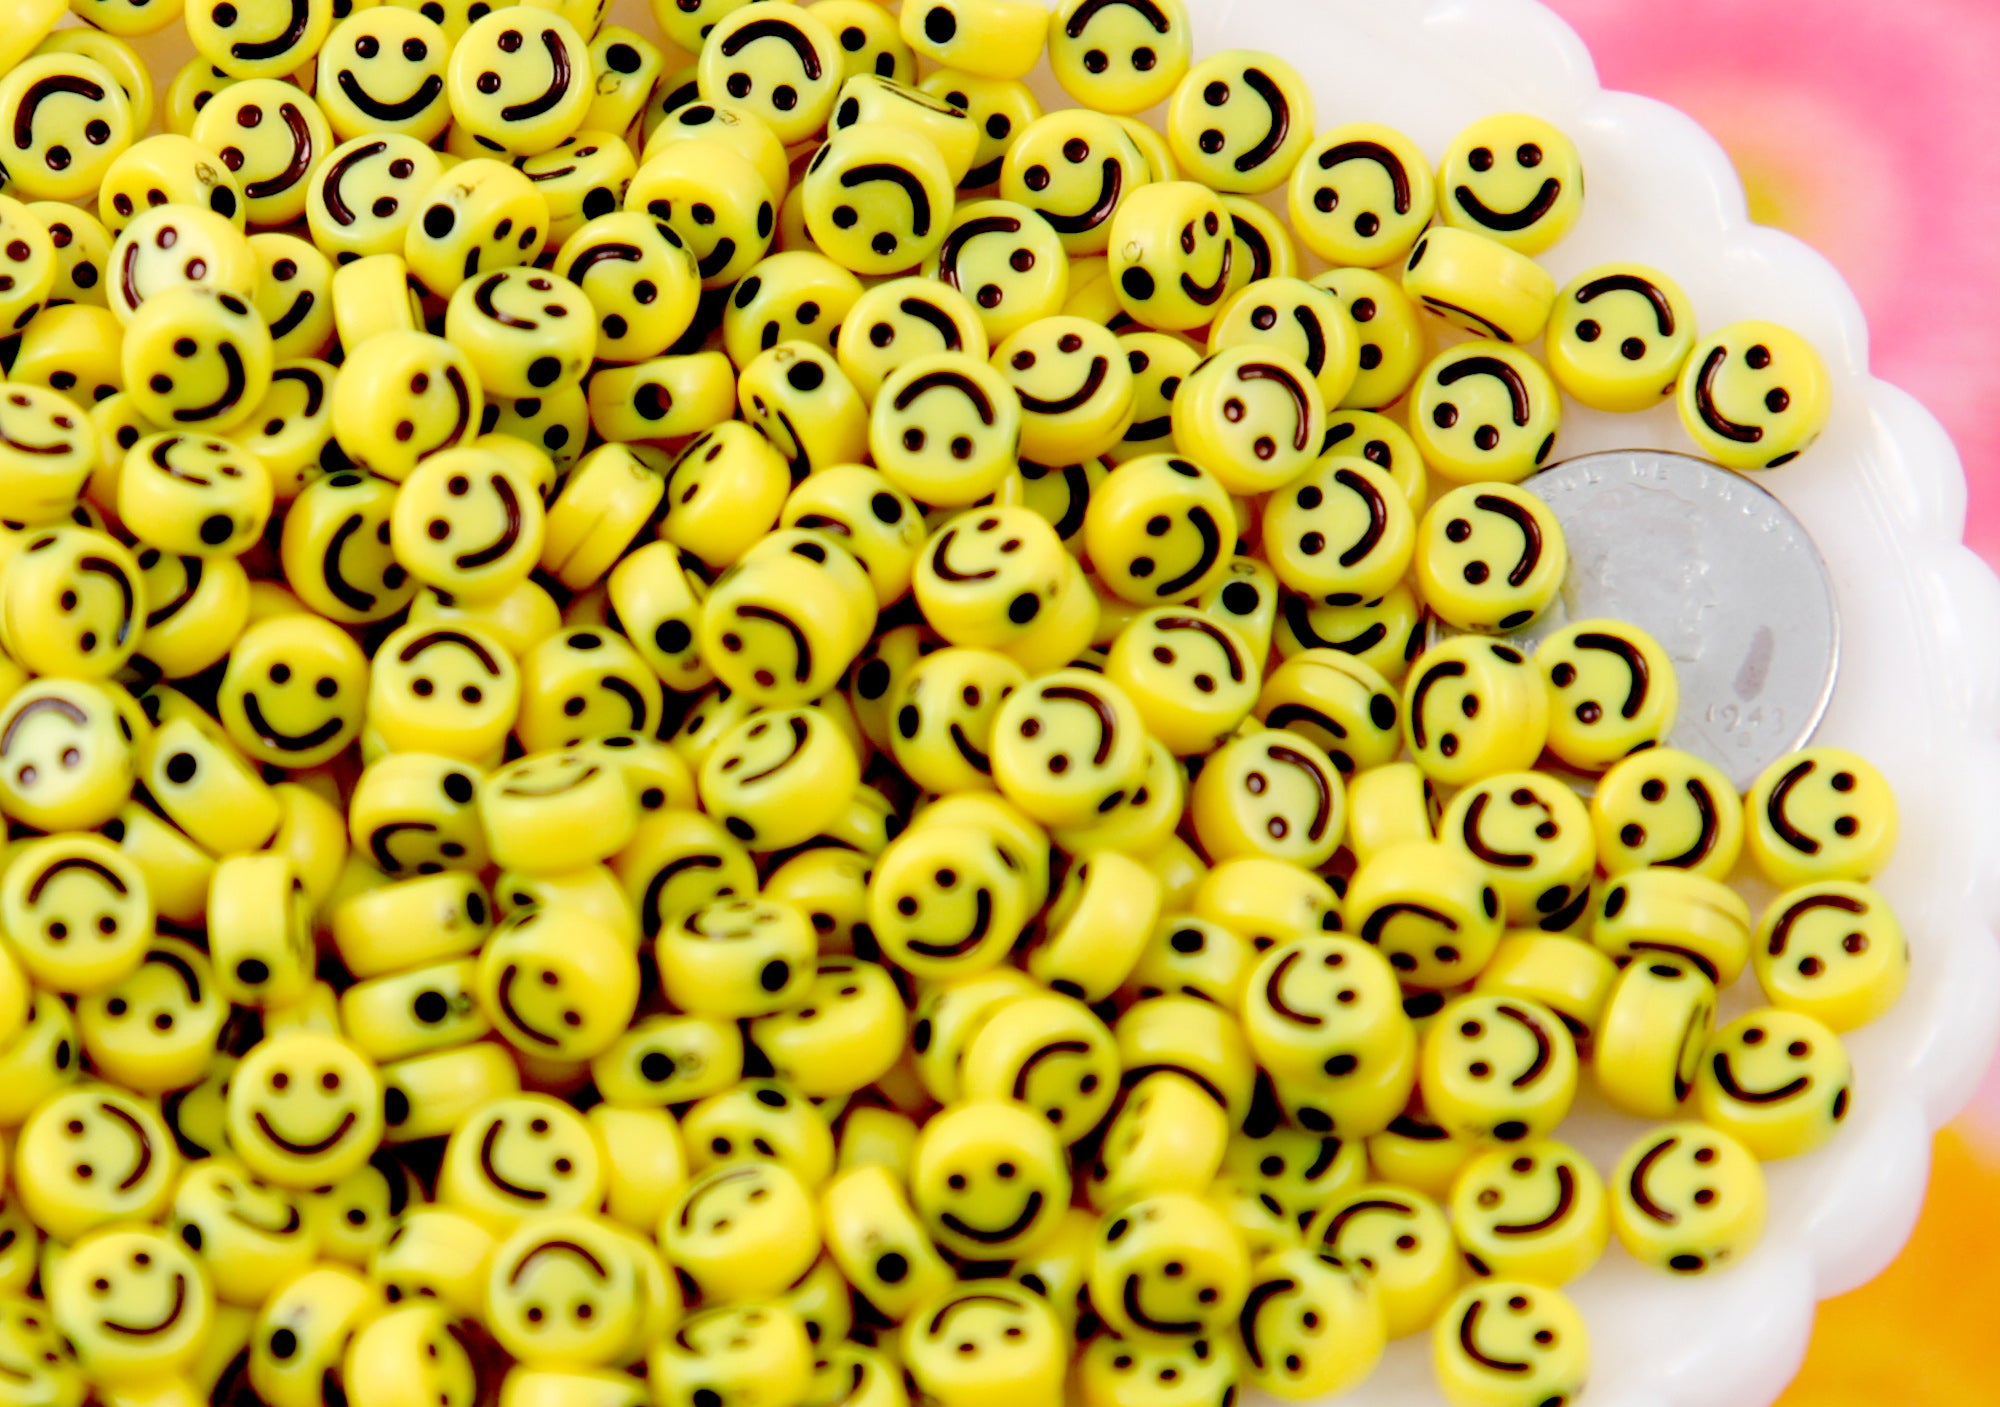 7mm Acrylic Smiley Face Beads, Pink Smiley Face Beads, White Smiley Face  Beads, Beads for Kids, Bracelet Beads Stretchy Bracelets 